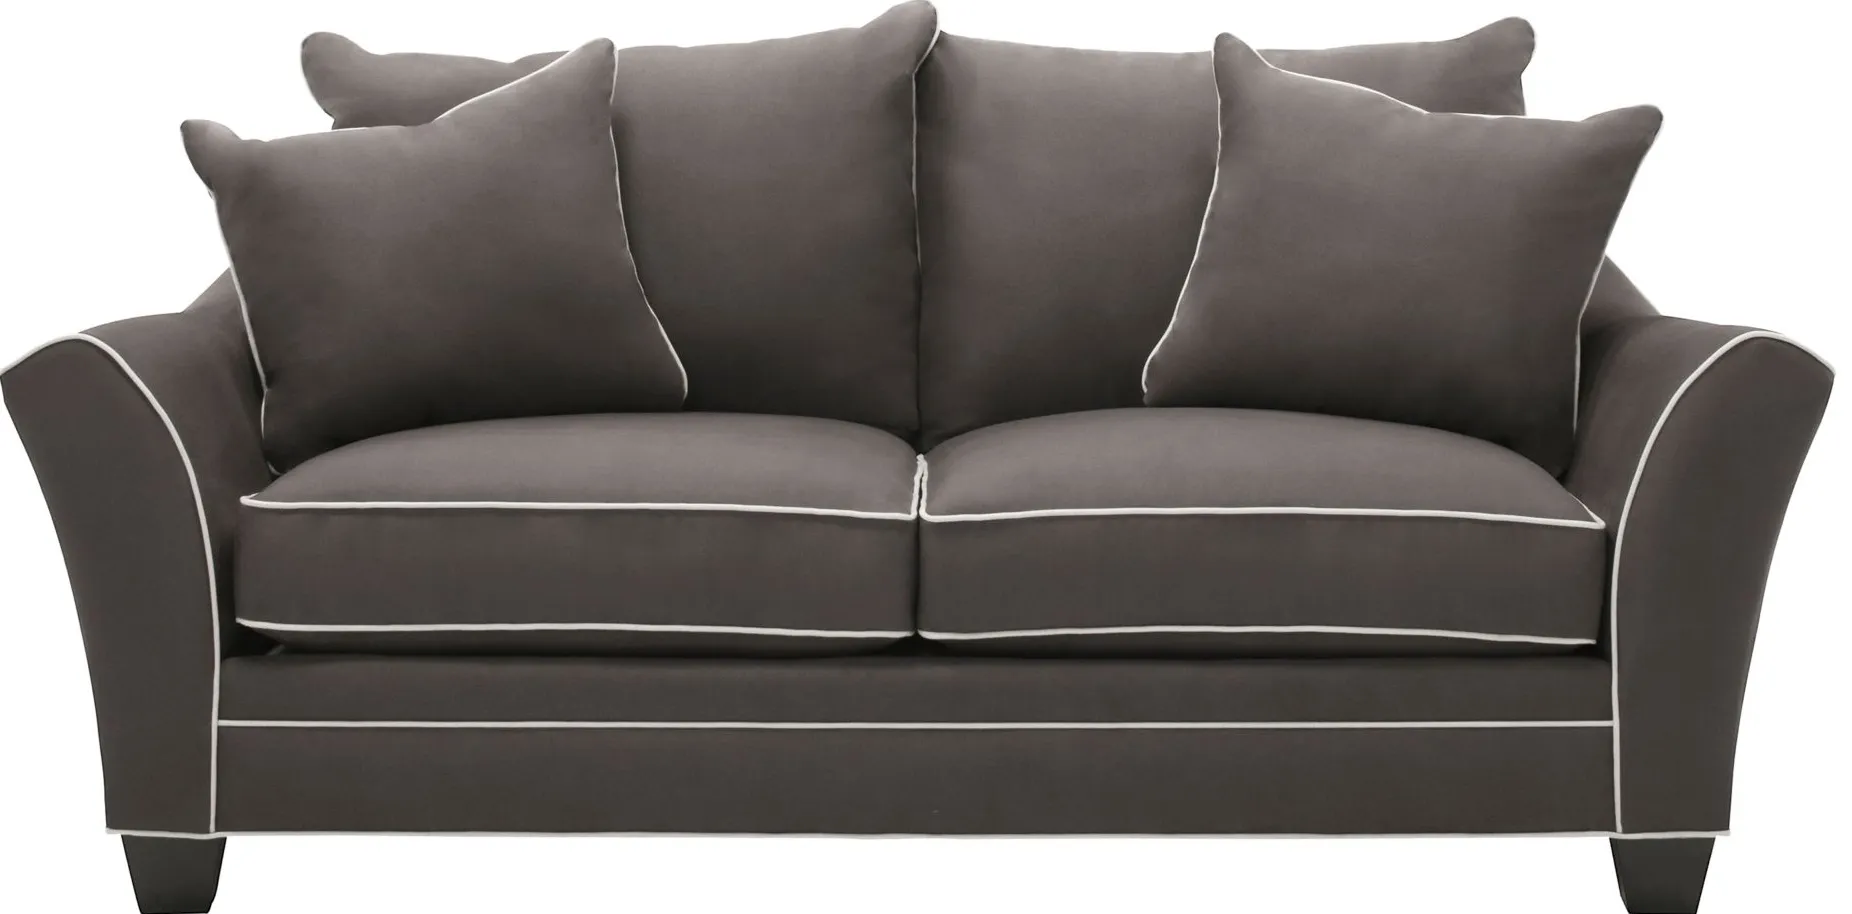 Briarwood Apartment Sofa in Suede So Soft Slate/Lt Taupe by H.M. Richards